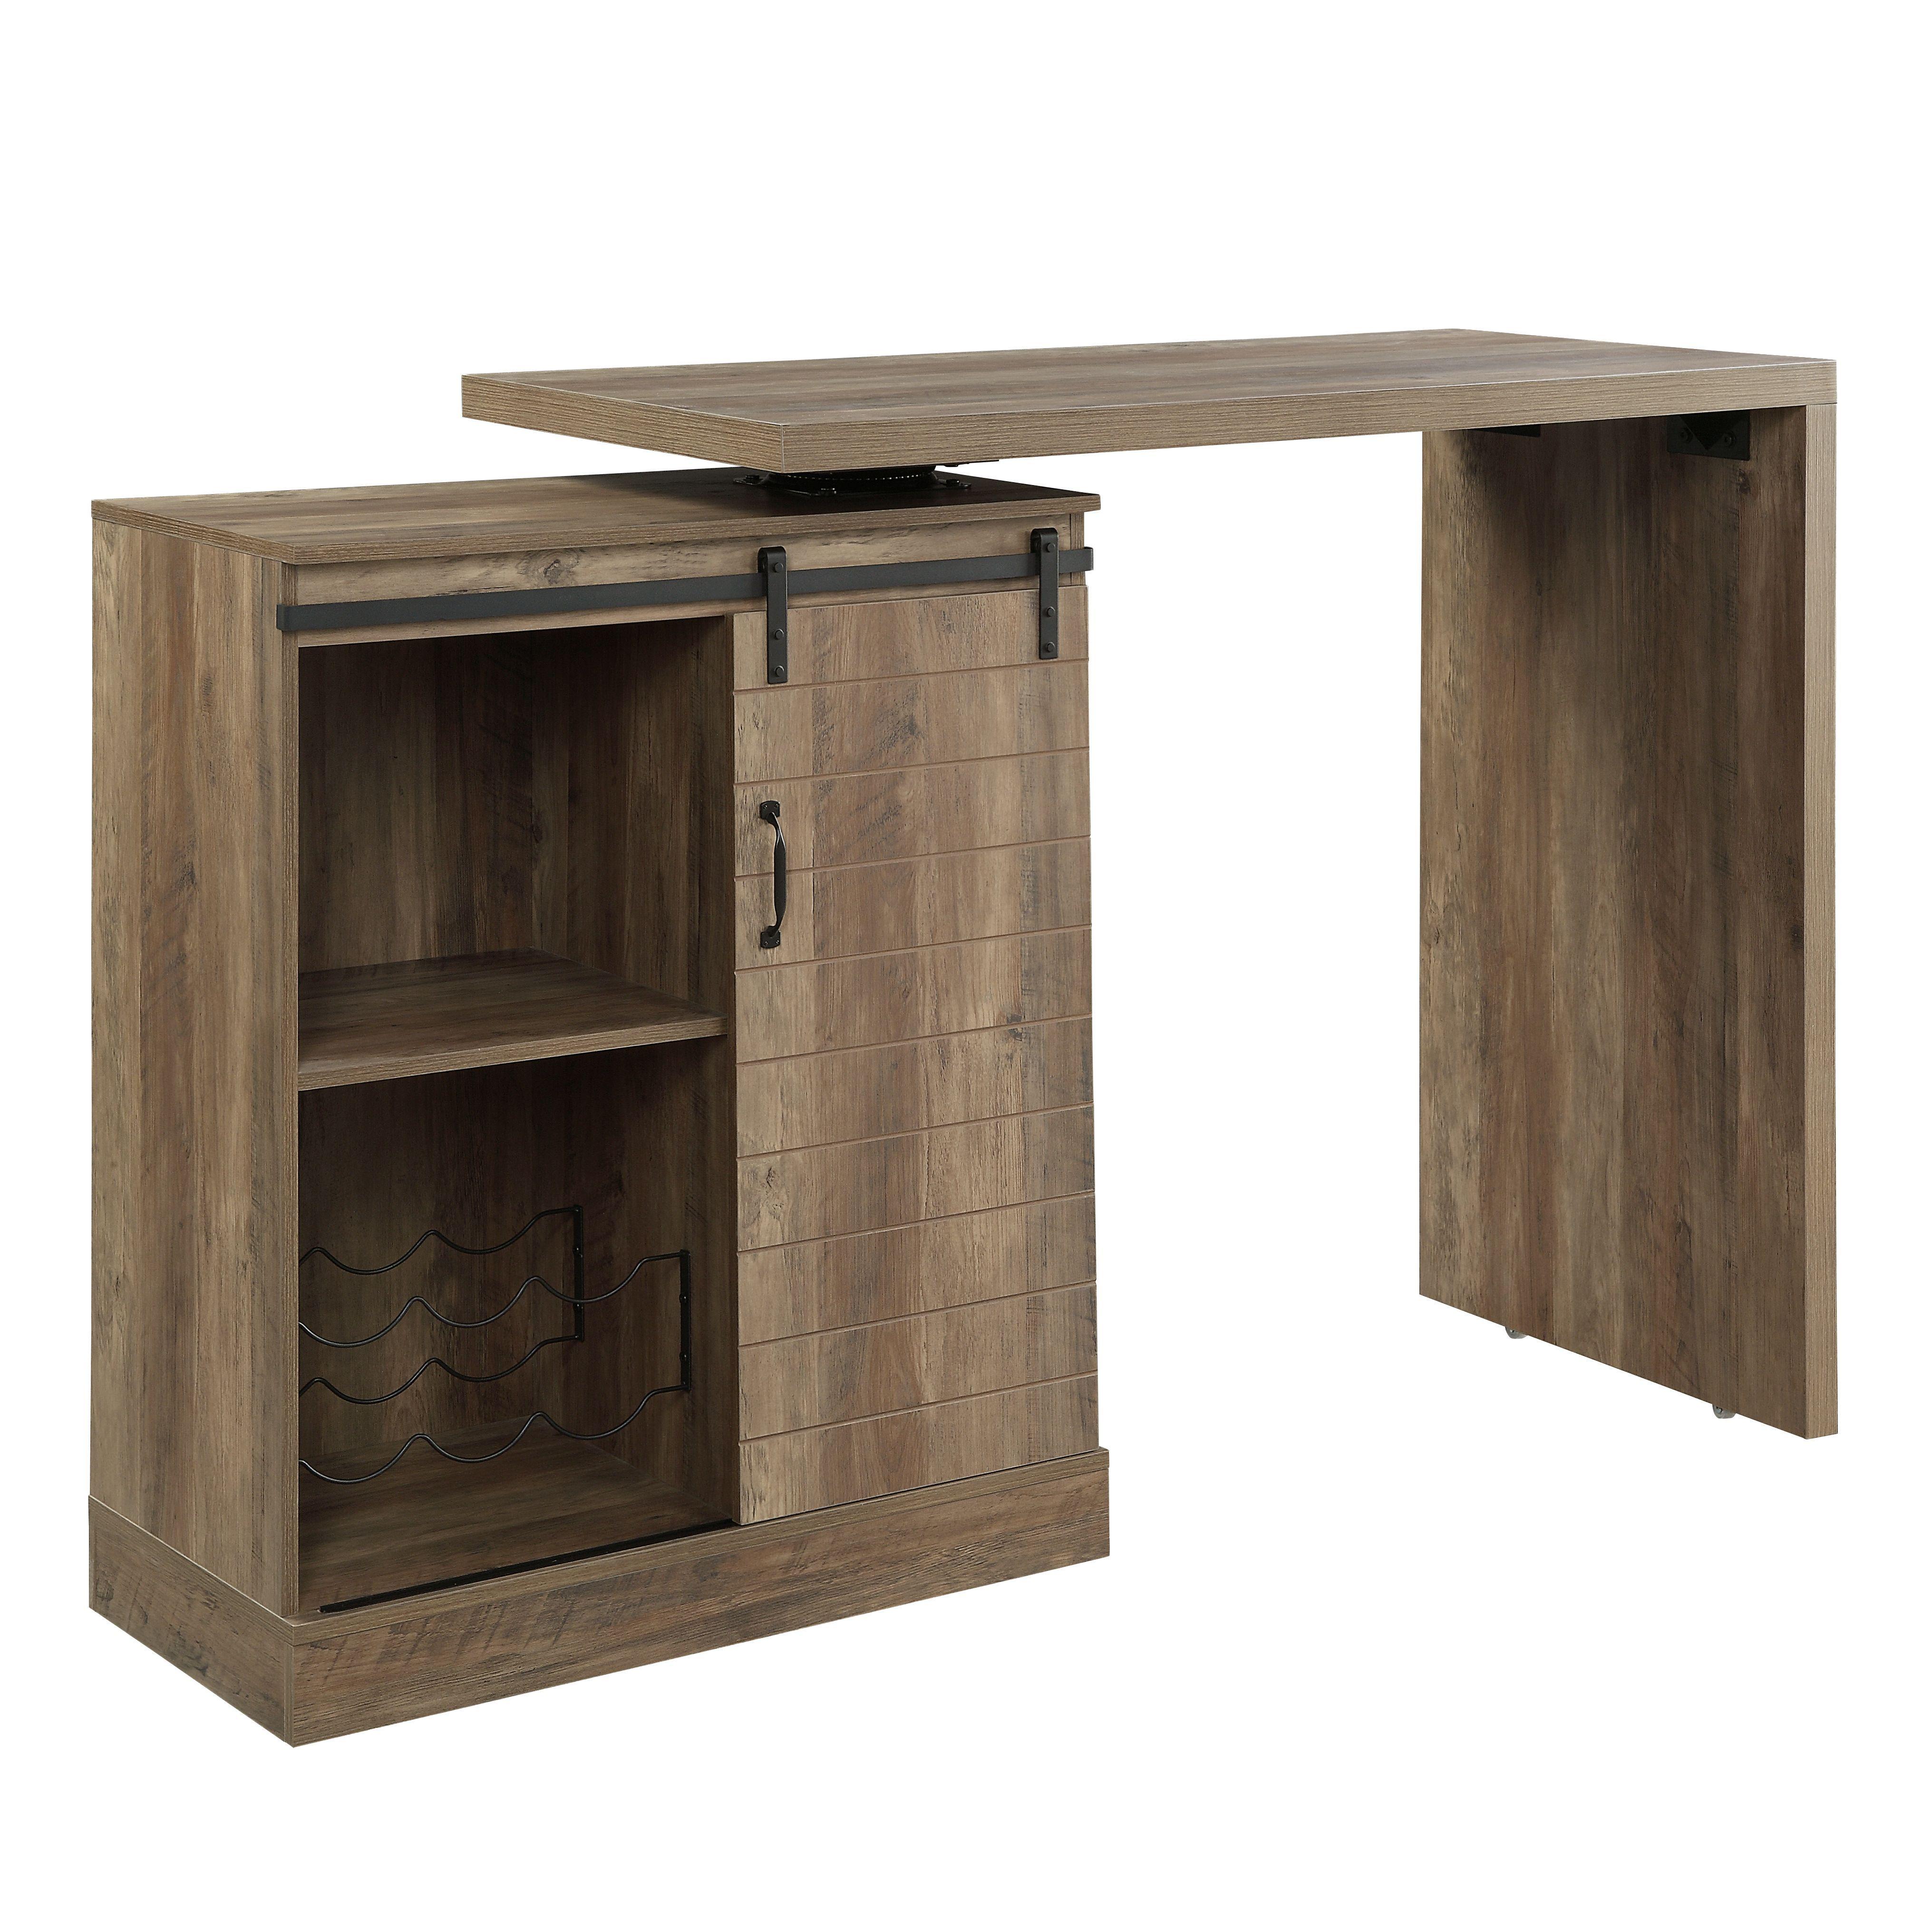 Rustic Bar Table Quillon DN00153 in Brown Oak 